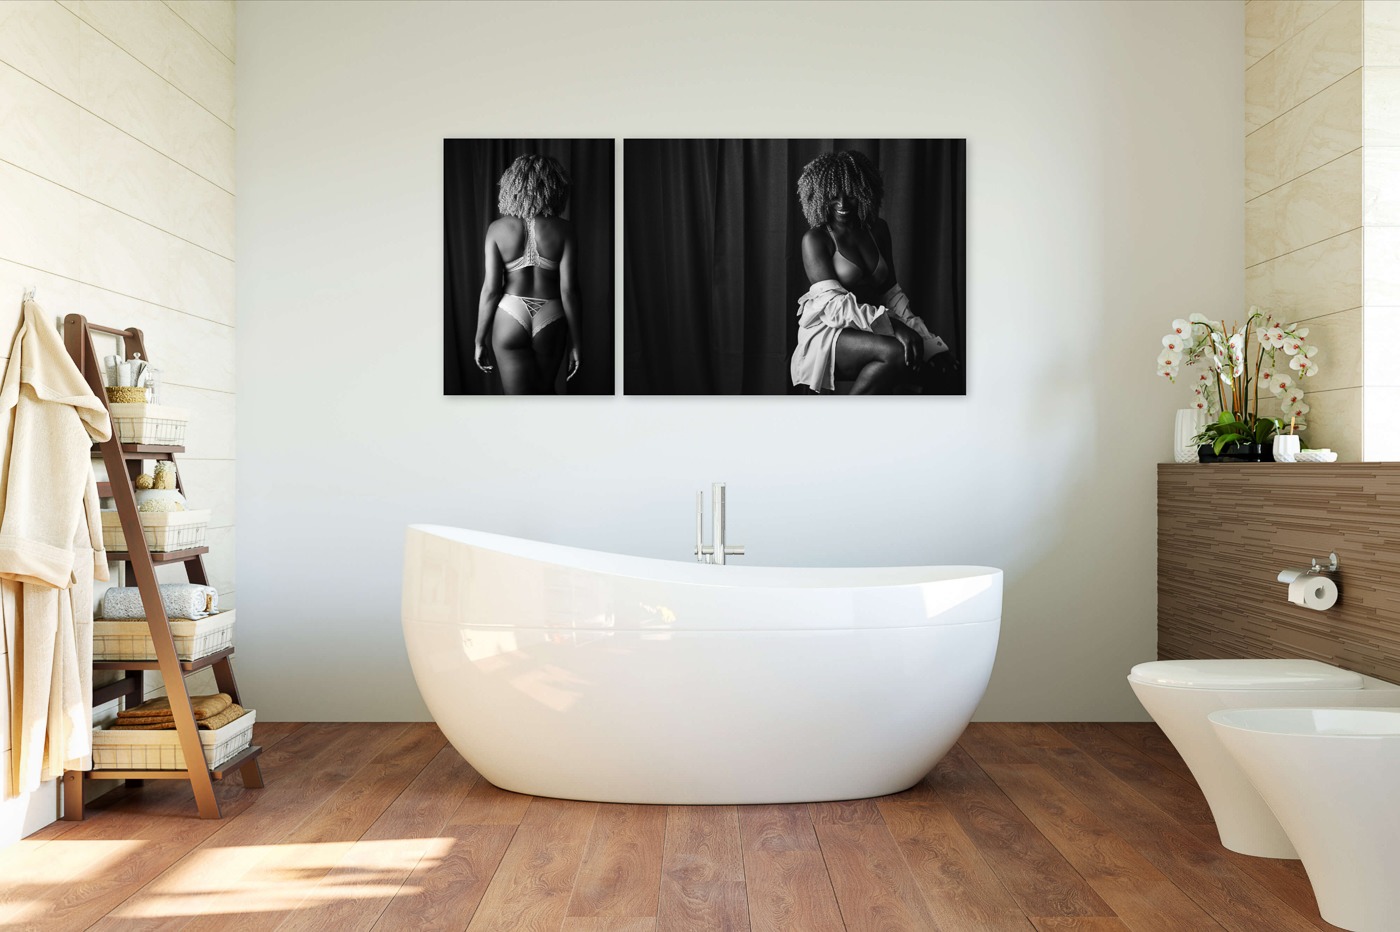 Gorgeous metal wall art of African American beauty black & white boudoir portraits hung over incredibly modern bath tub